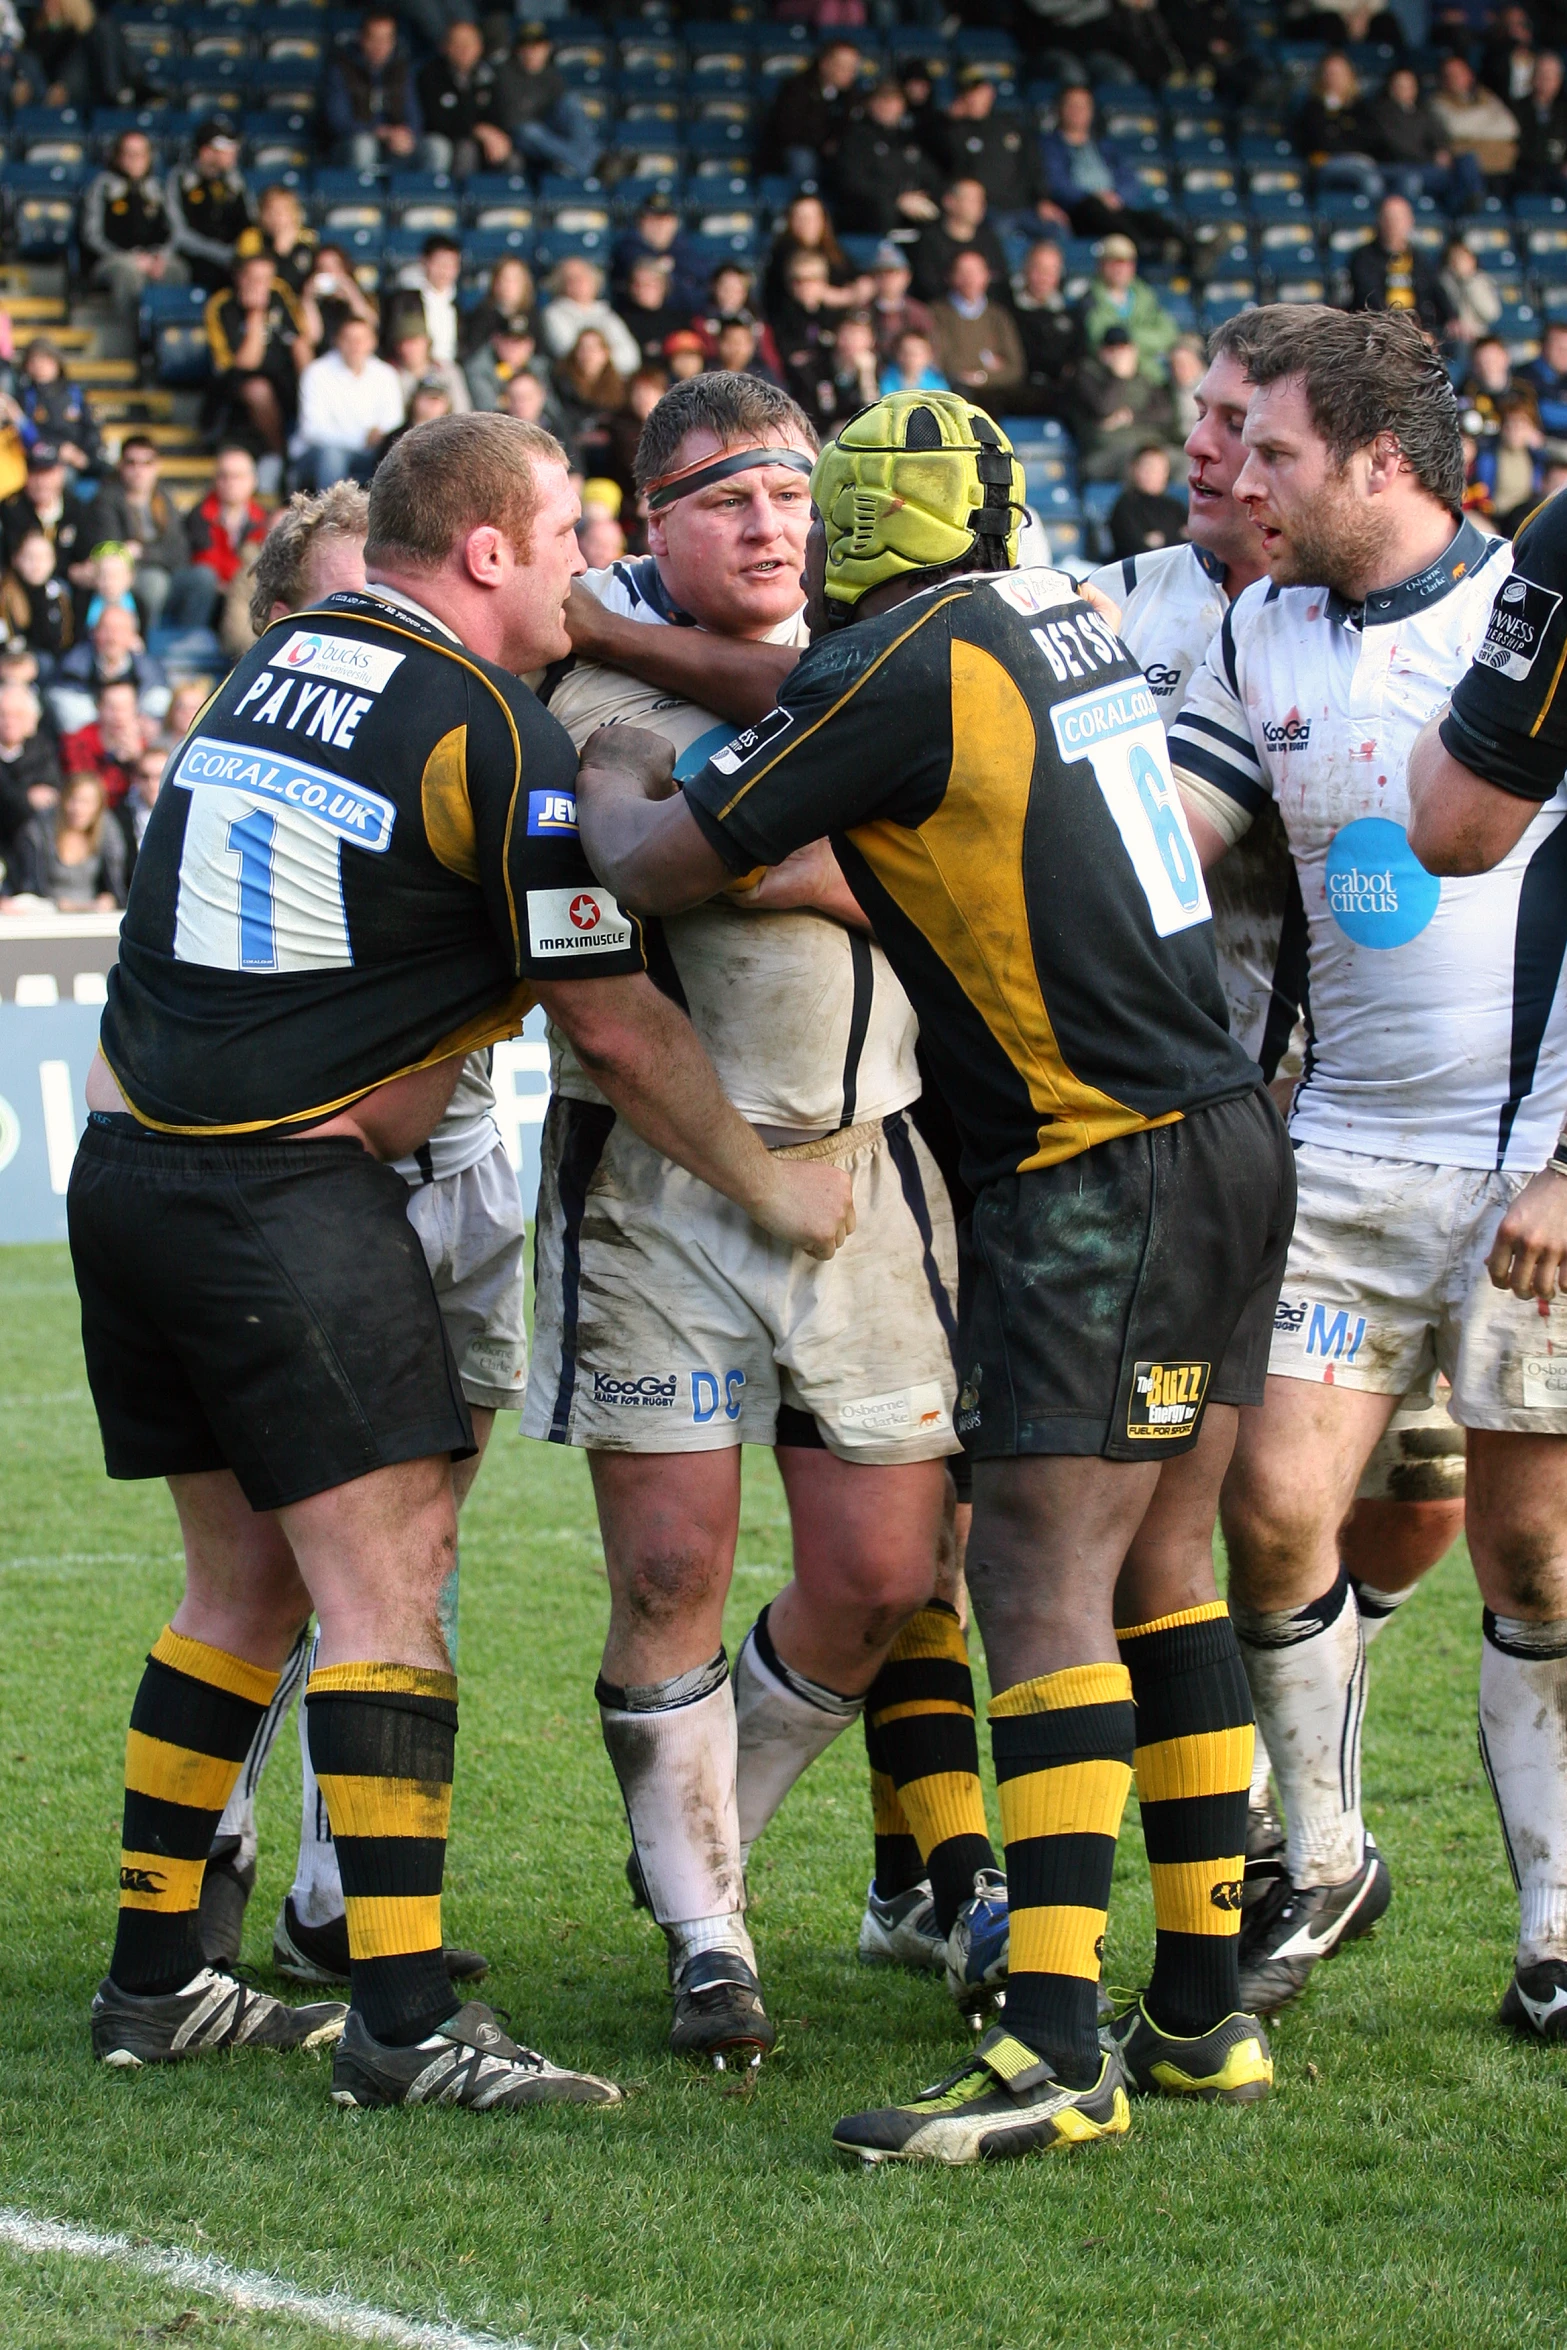 rugby players huddled in a huddle during a game